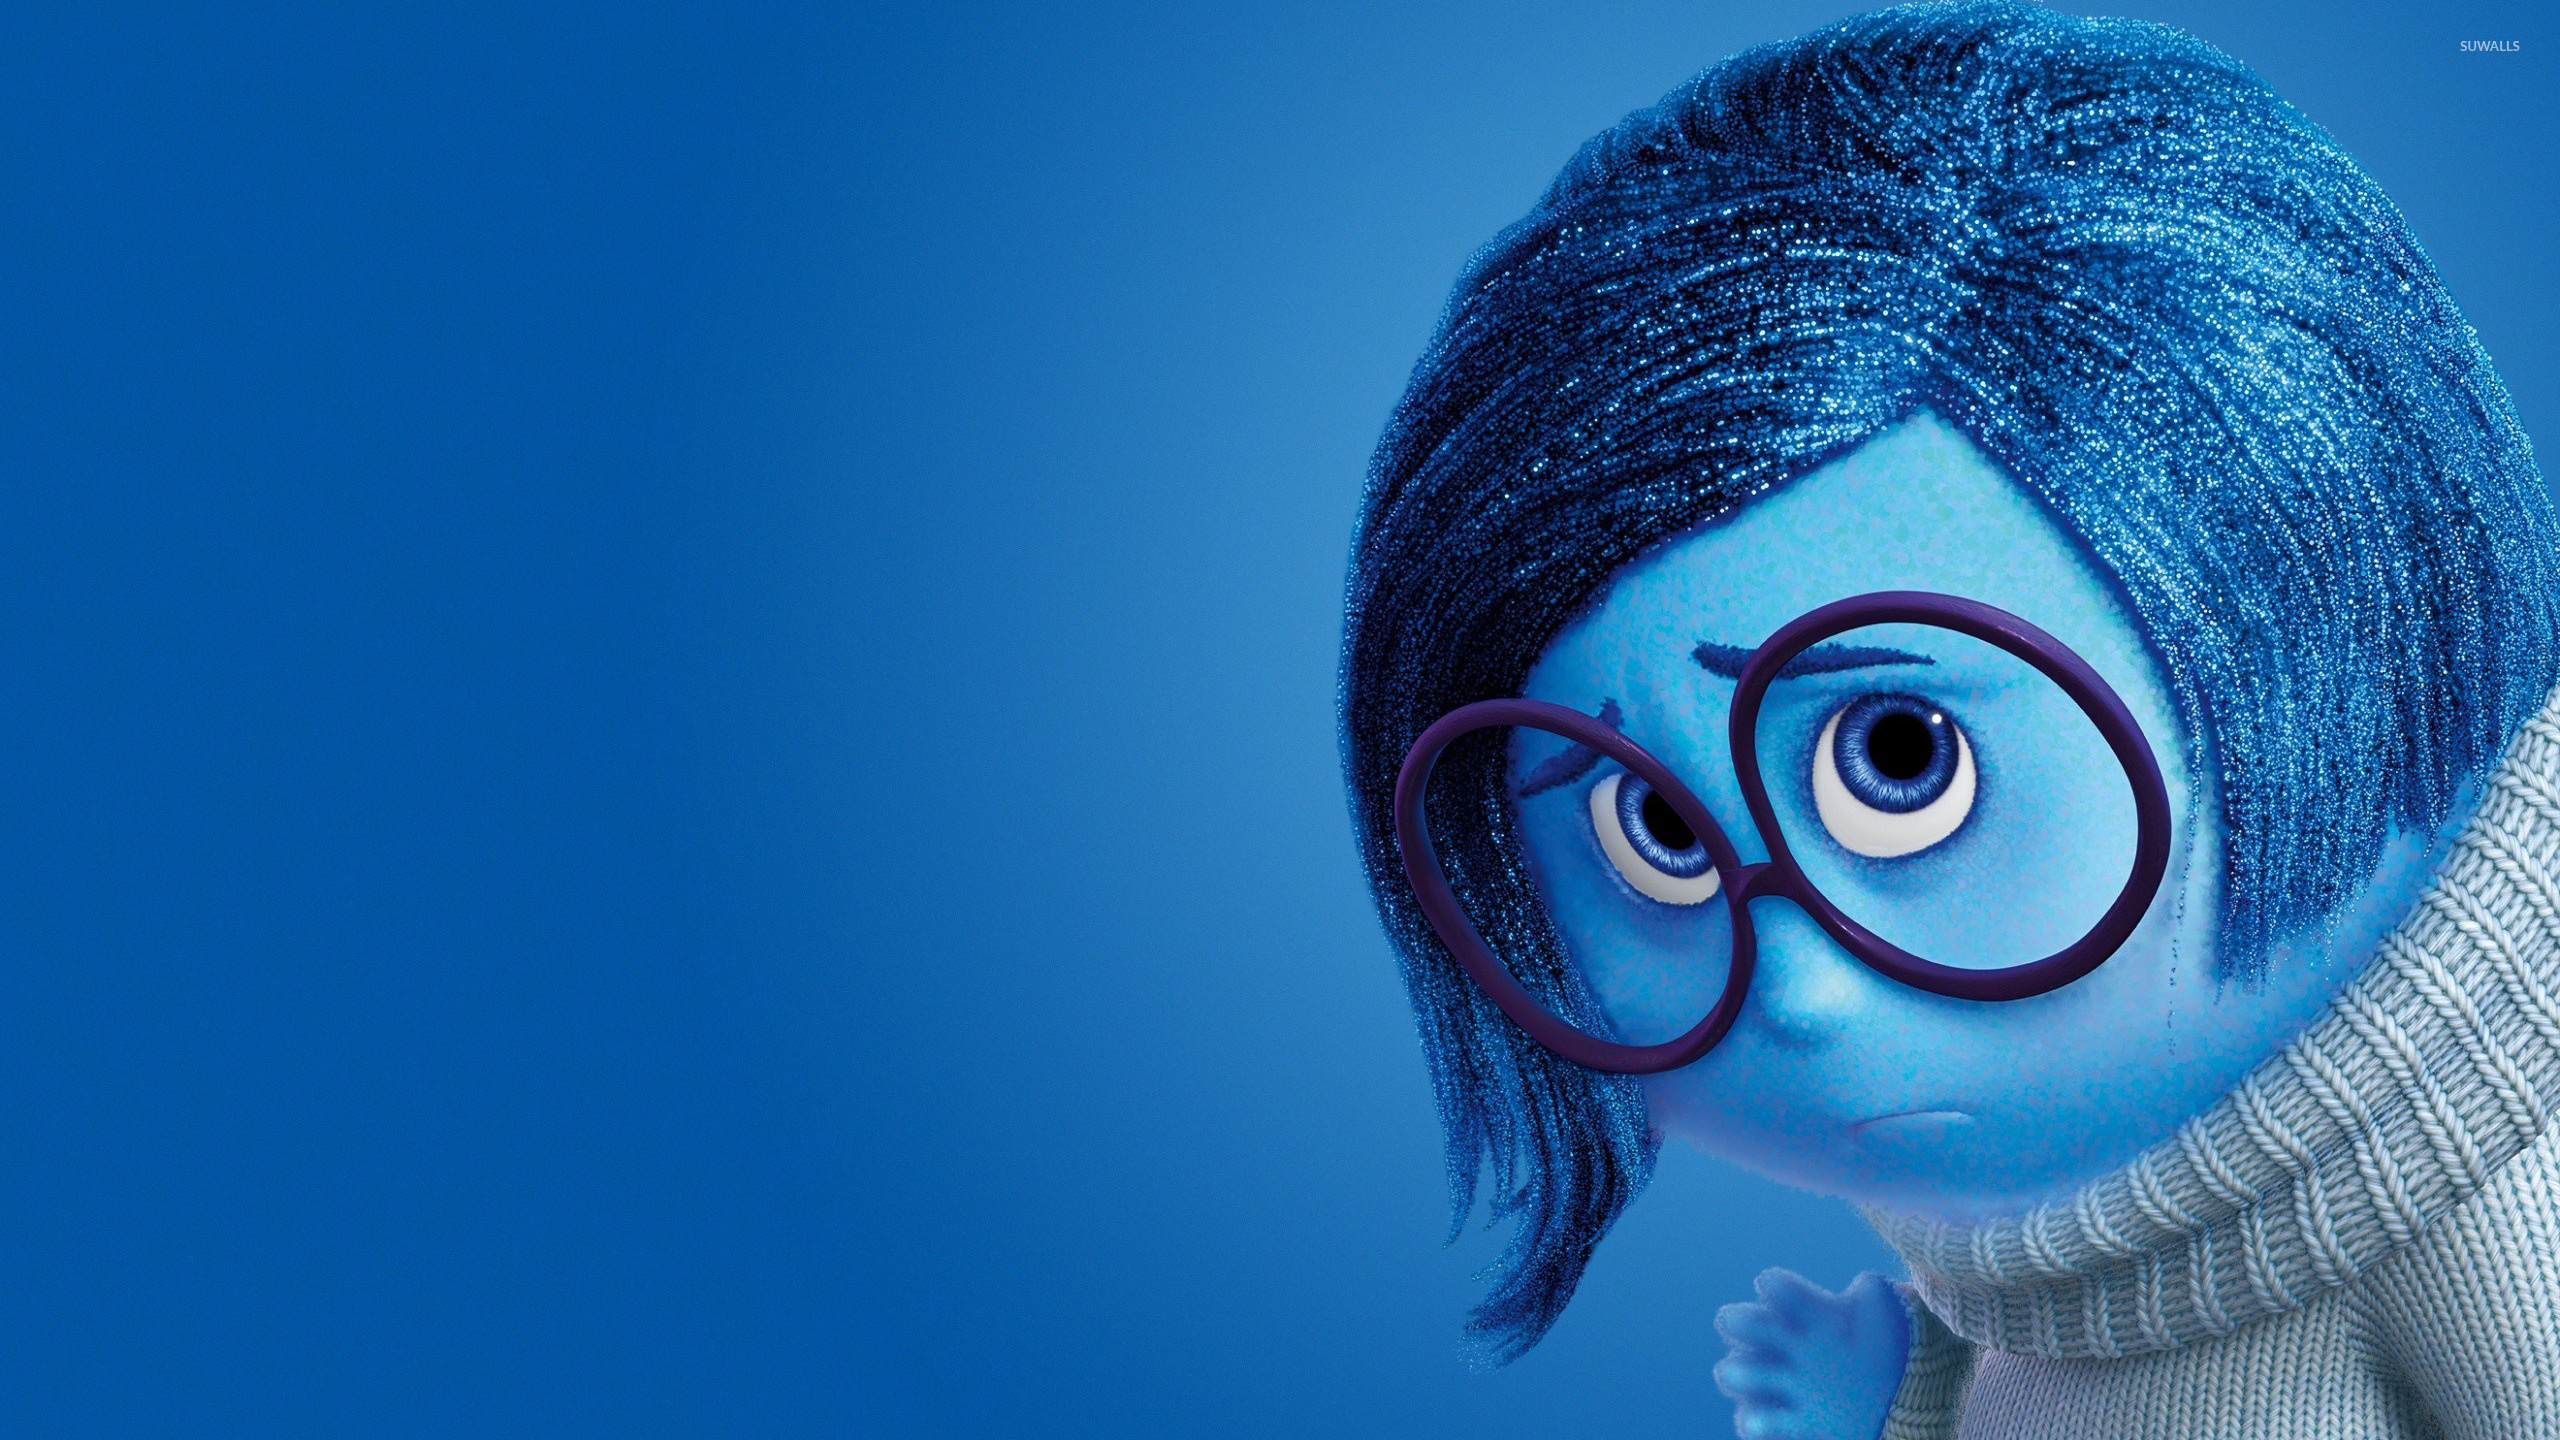 Sadness in Inside Out wallpaper   Cartoon wallpapers   50969